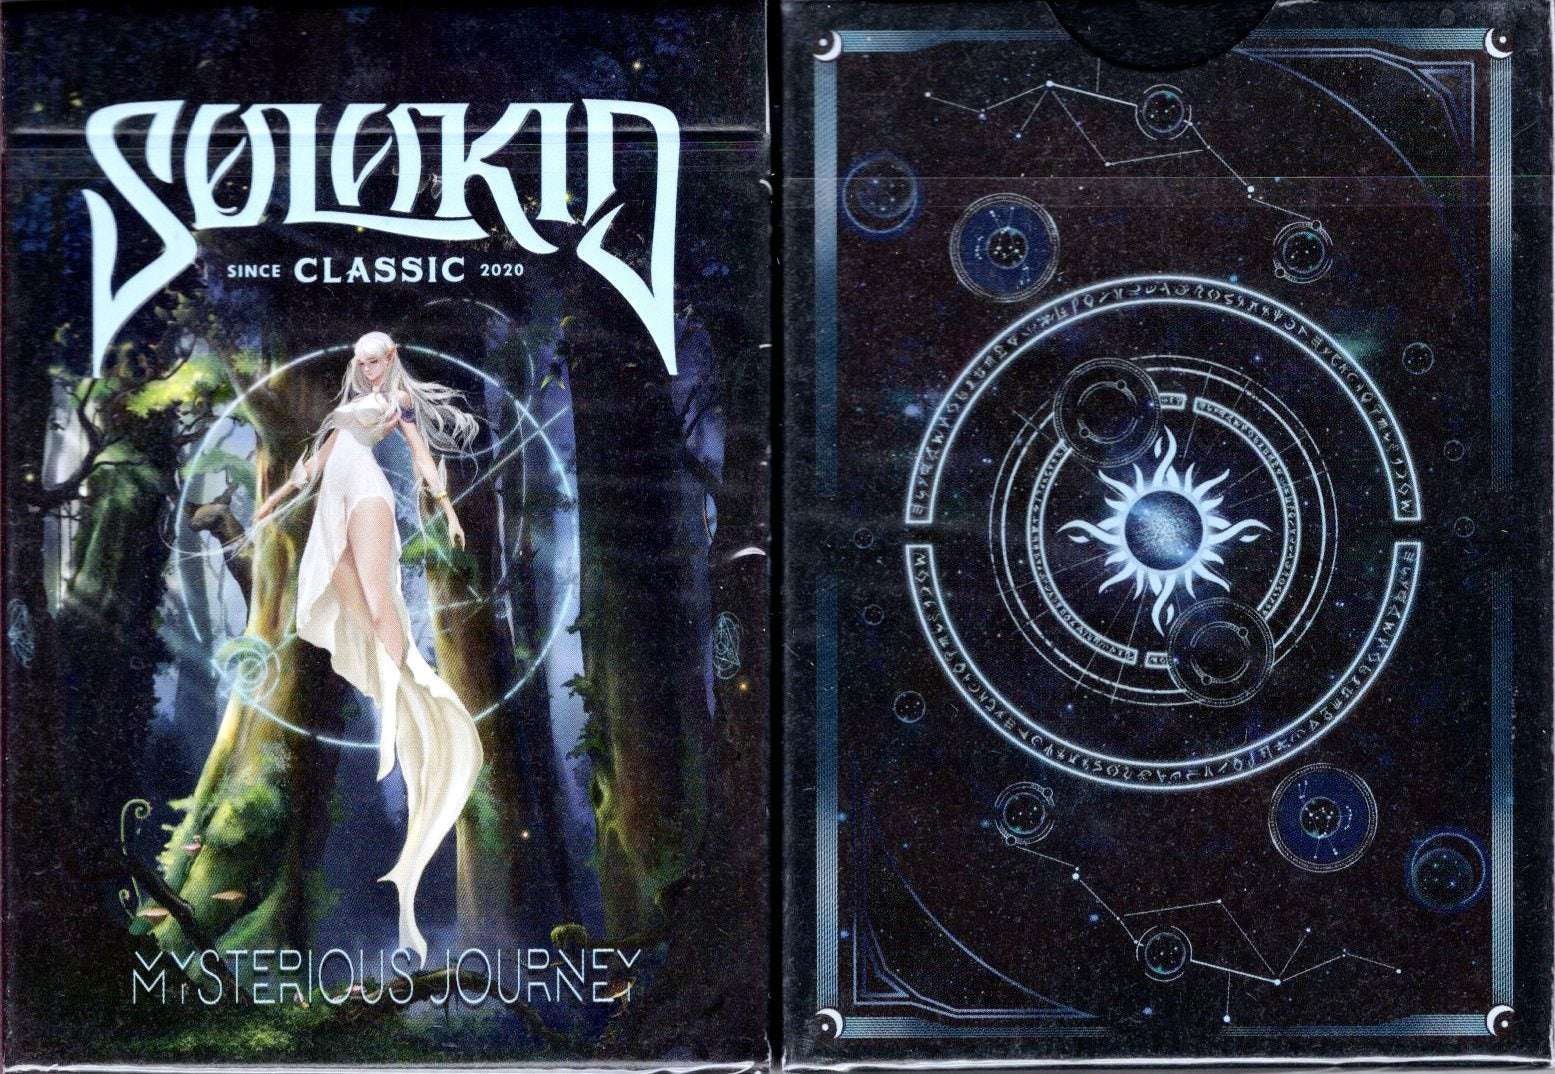 PlayingCardDecks.com-Mysterious Journey Solokid Playing Cards MPC